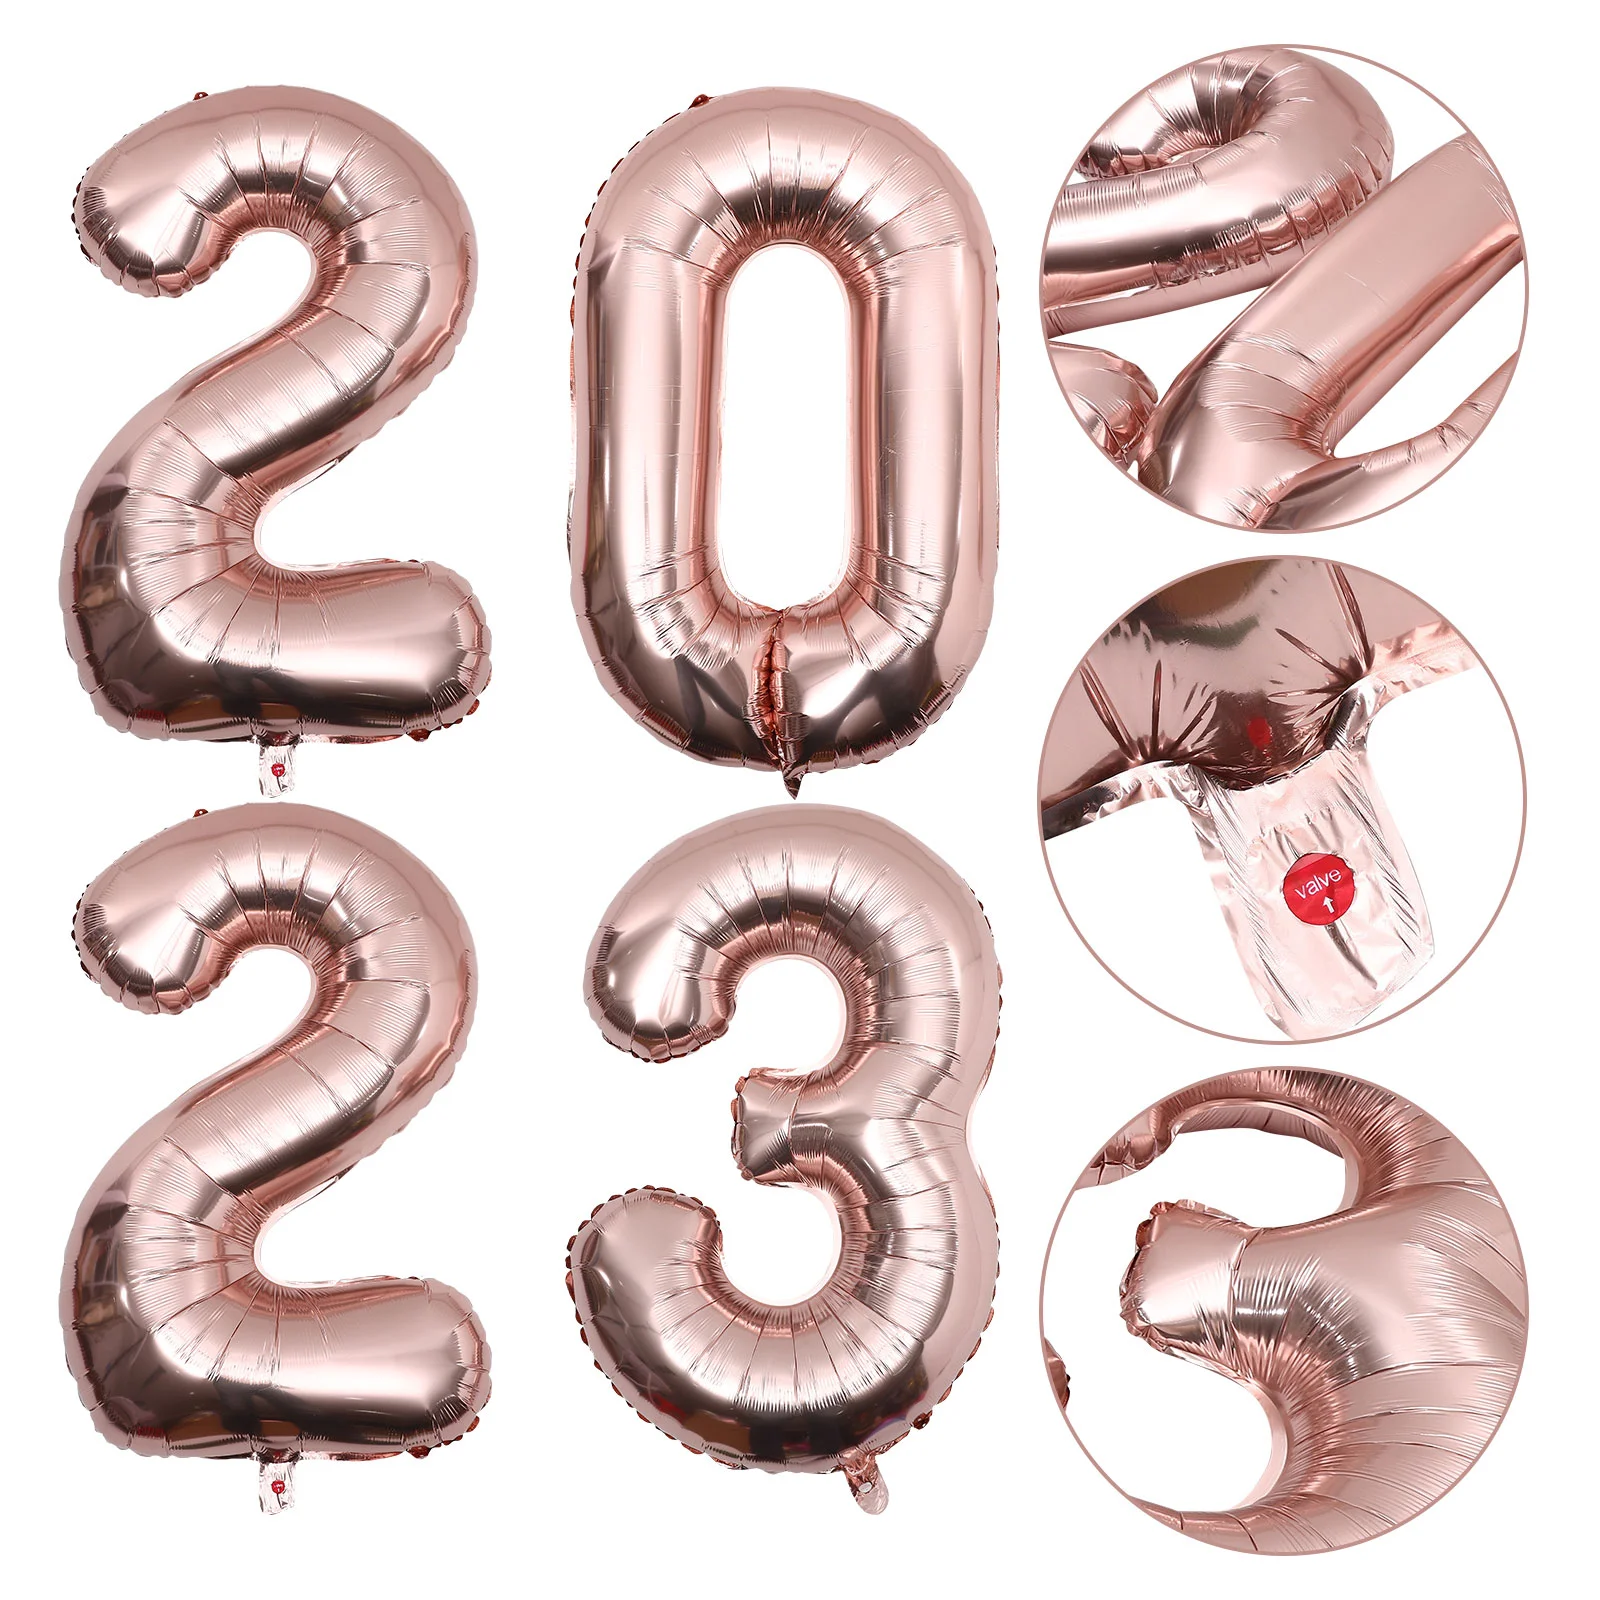 

Balloons Balloon New Party Years Year Supplies Number Baby Shower Festivaldecorations Decoration Eve Birthday Nye Accessories